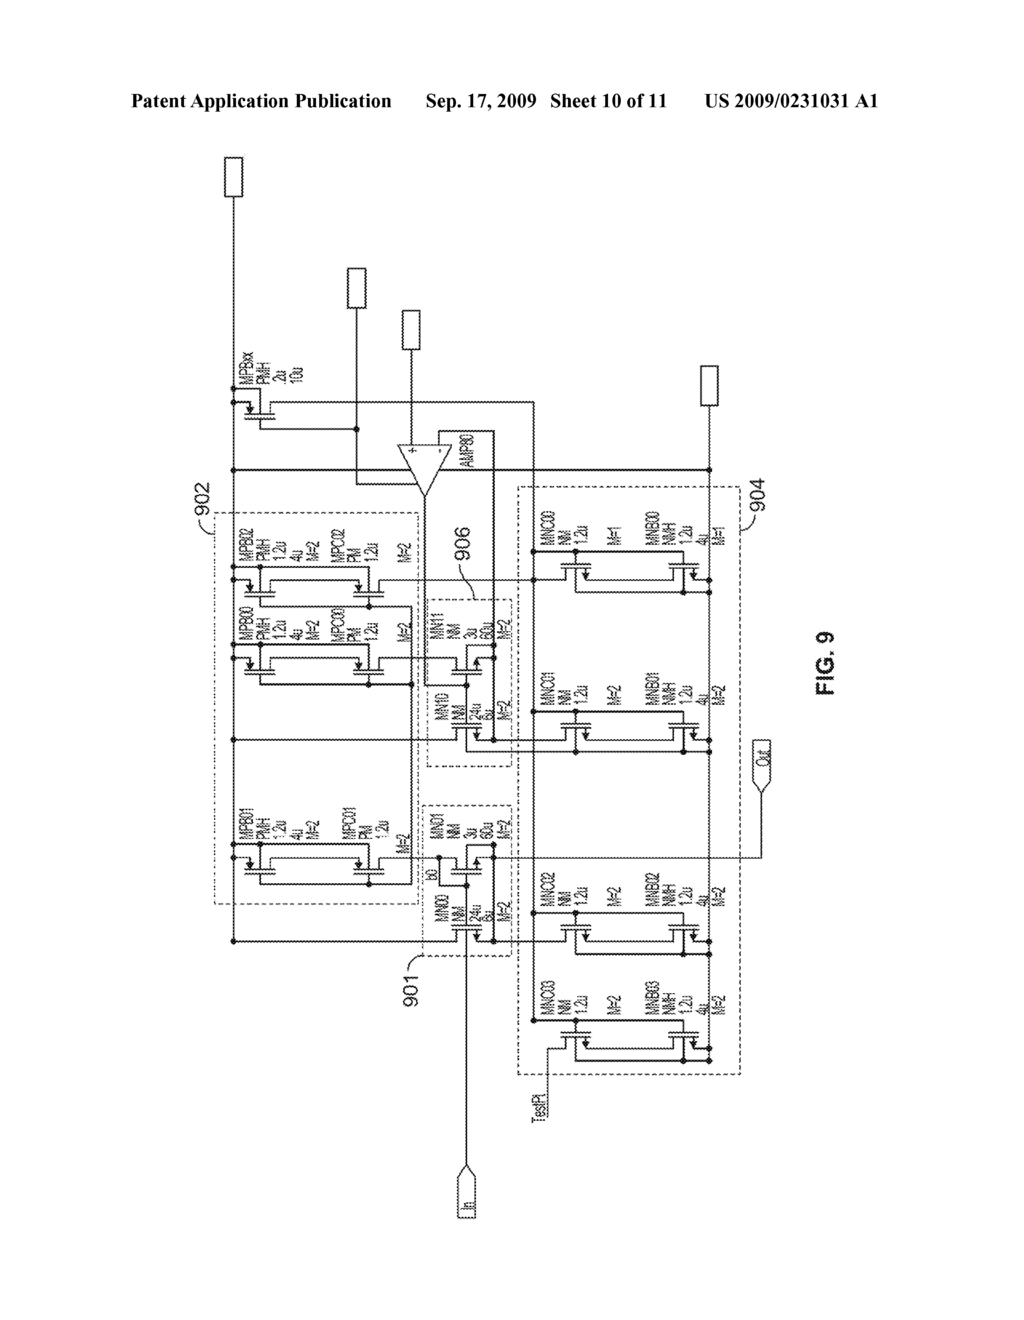 HIGH-IMPEDANCE LEVEL-SHIFTING AMPLIFIER CAPABLE OF HANDLING INPUT SIGNALS WITH A VOLTAGE MAGNITUDE THAT EXCEEDS A SUPPLY VOLTAGE - diagram, schematic, and image 11